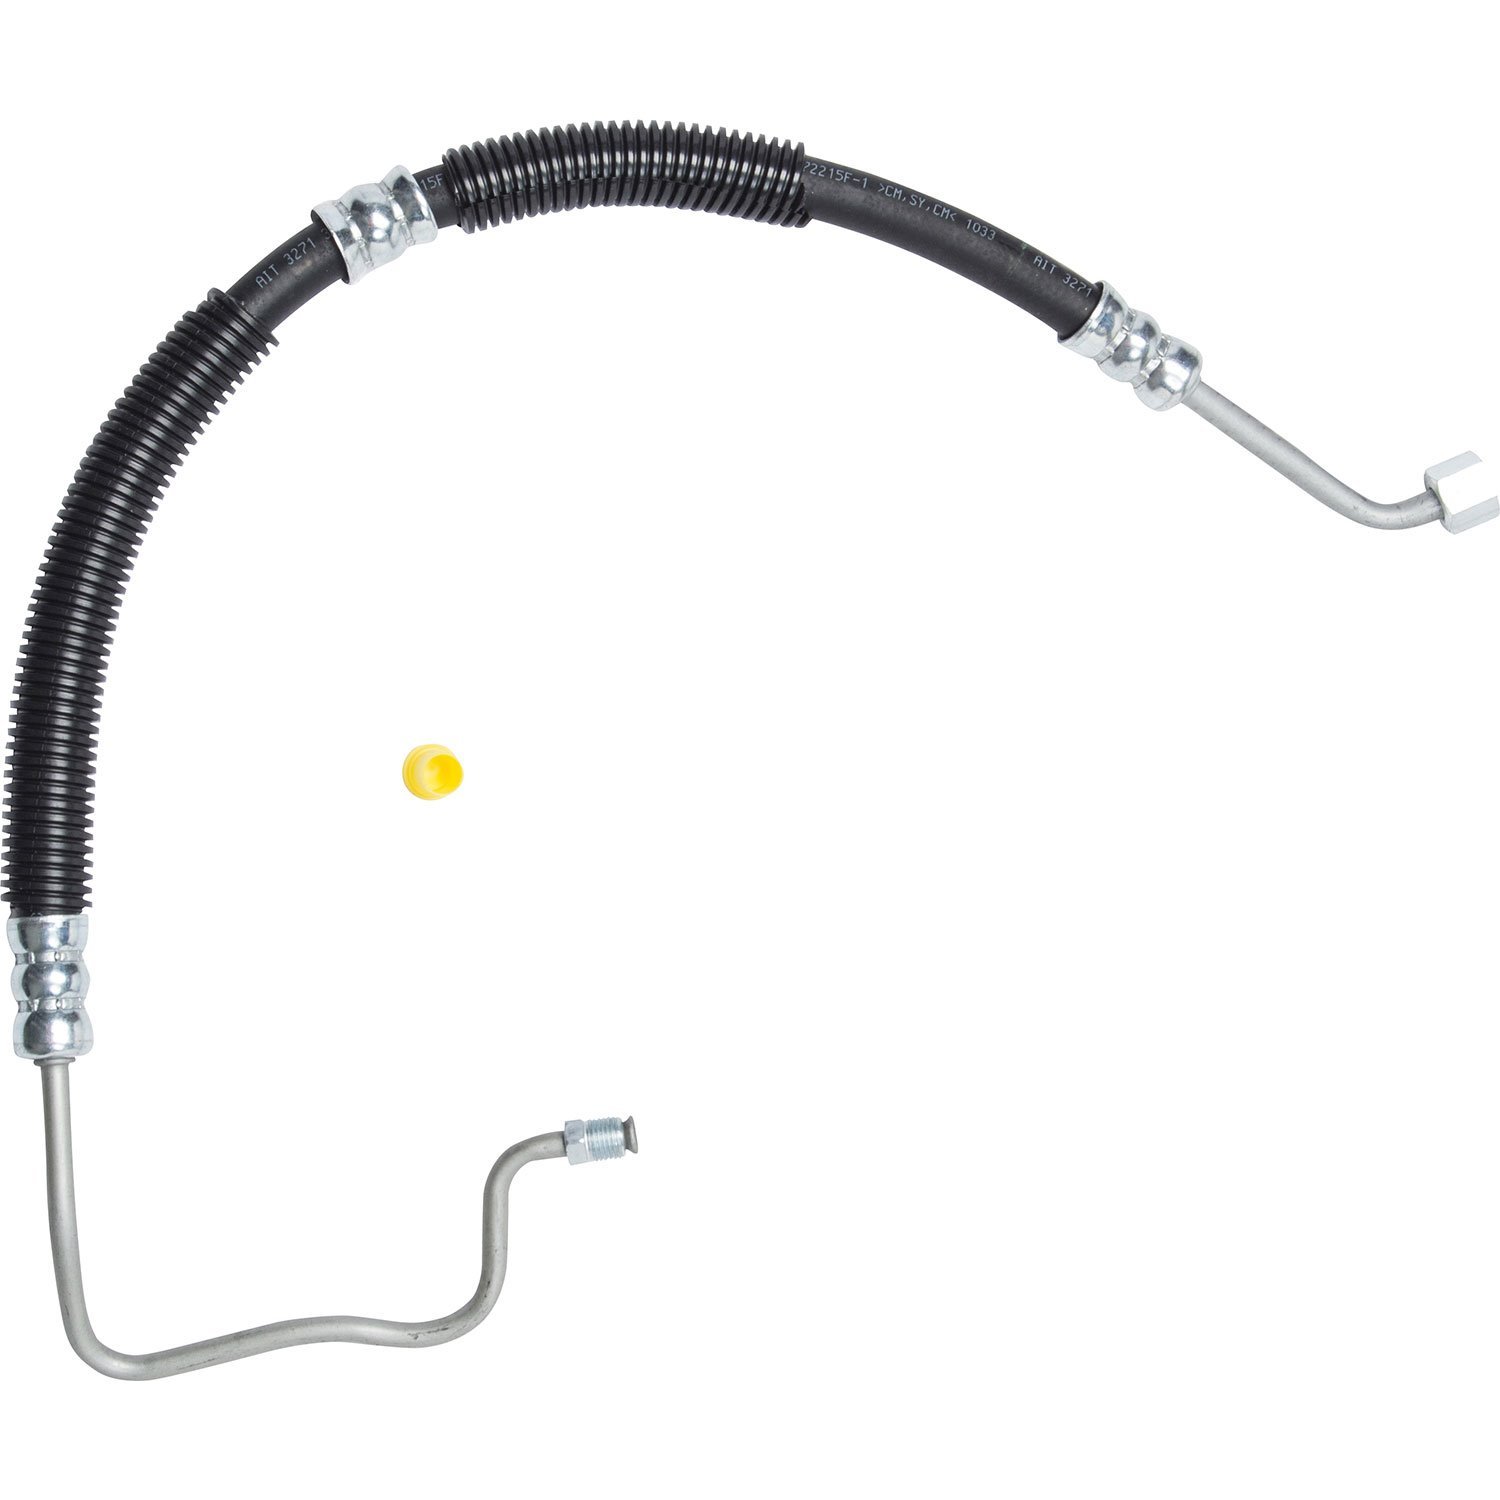 Power Steering Hose Assembly for Select 1967-1974 Ford, Mercury